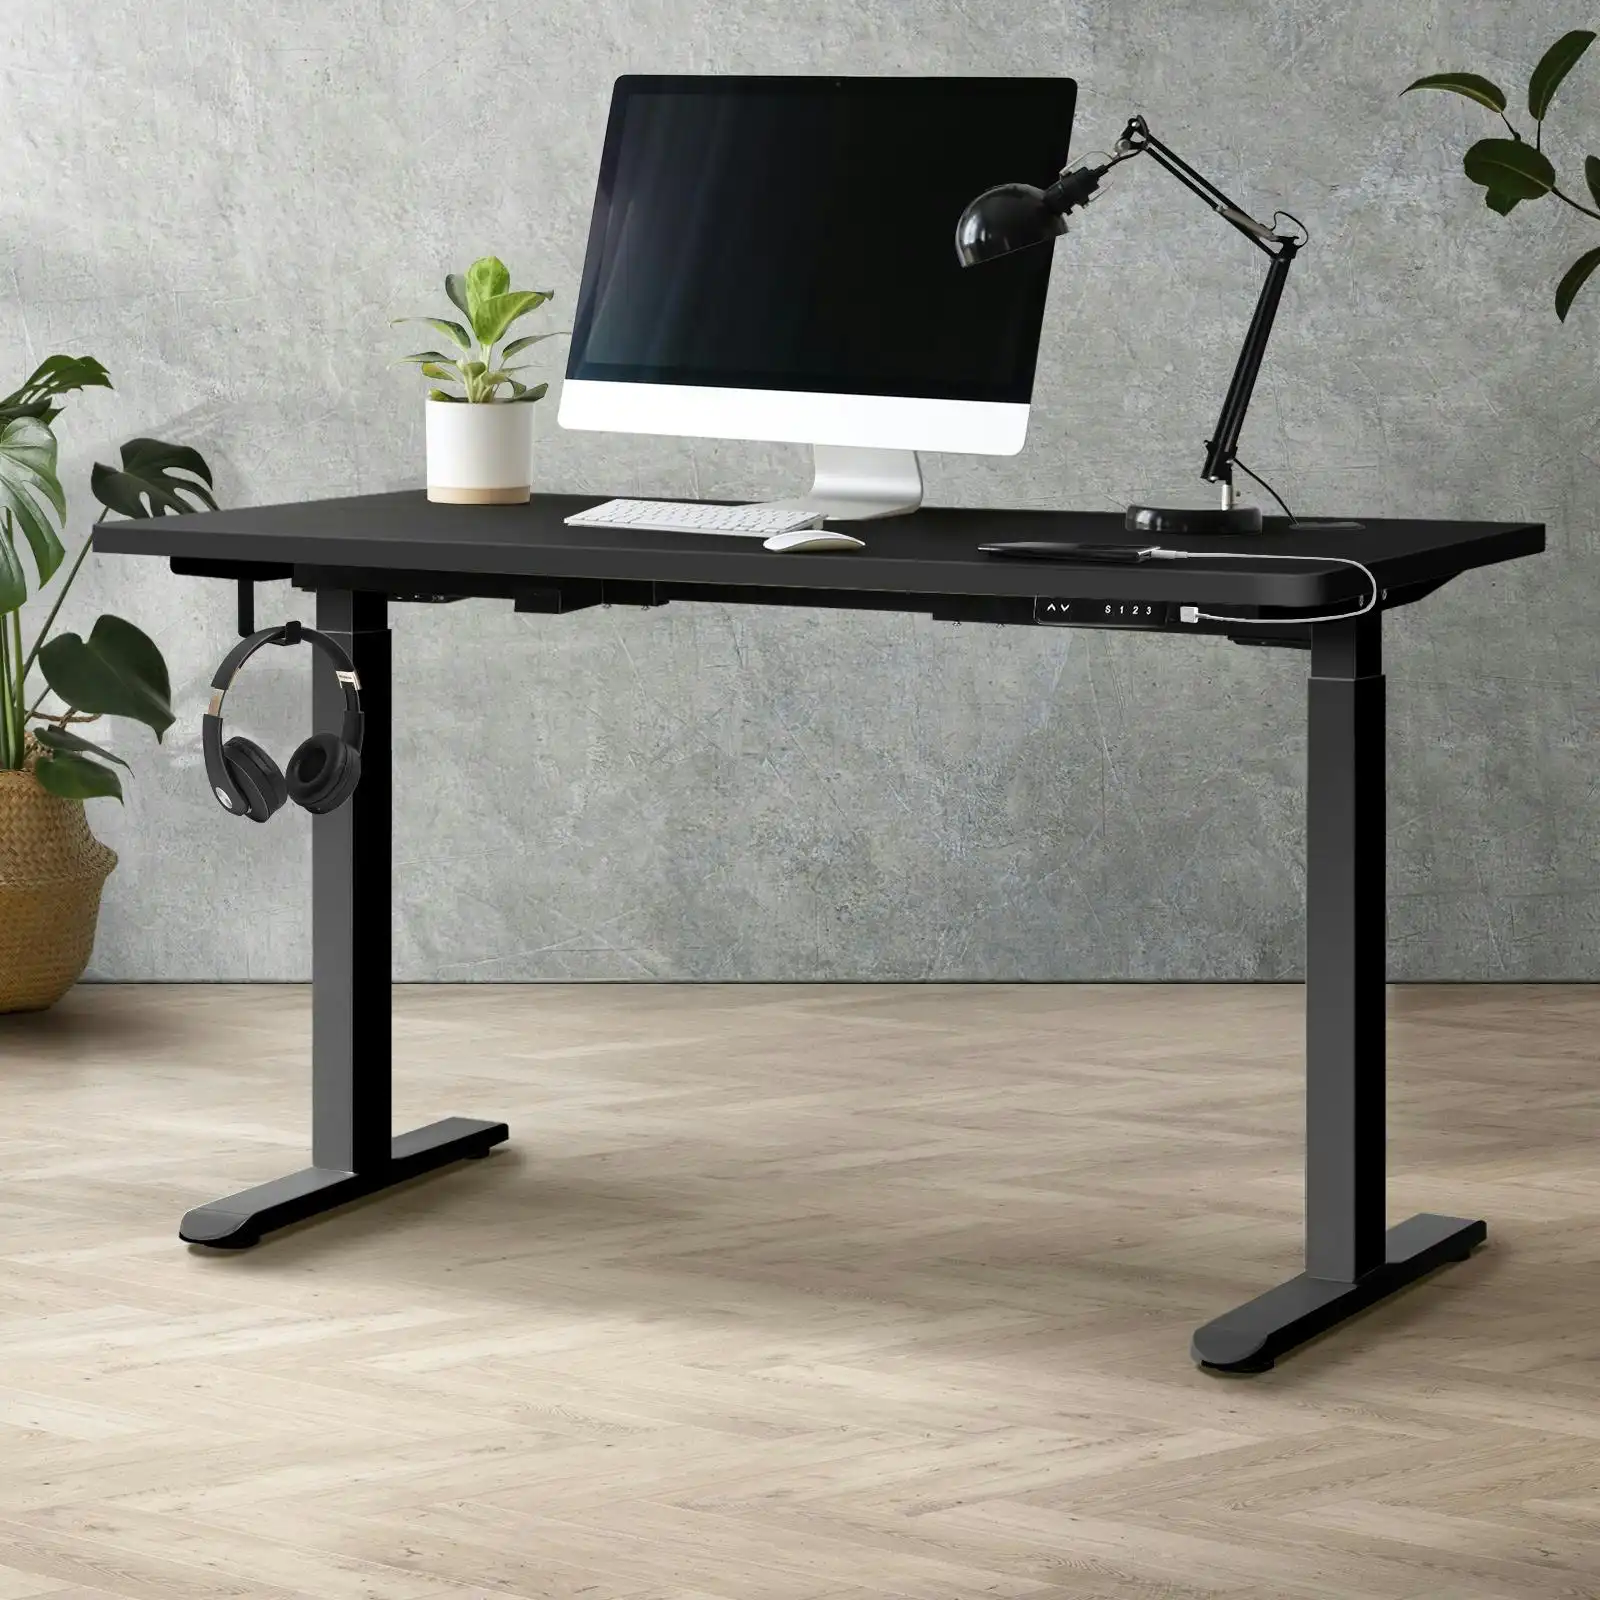 Oikiture Standing Desk Dual Motor Electric Height Adjustable Sit Stand Table 120cm Black